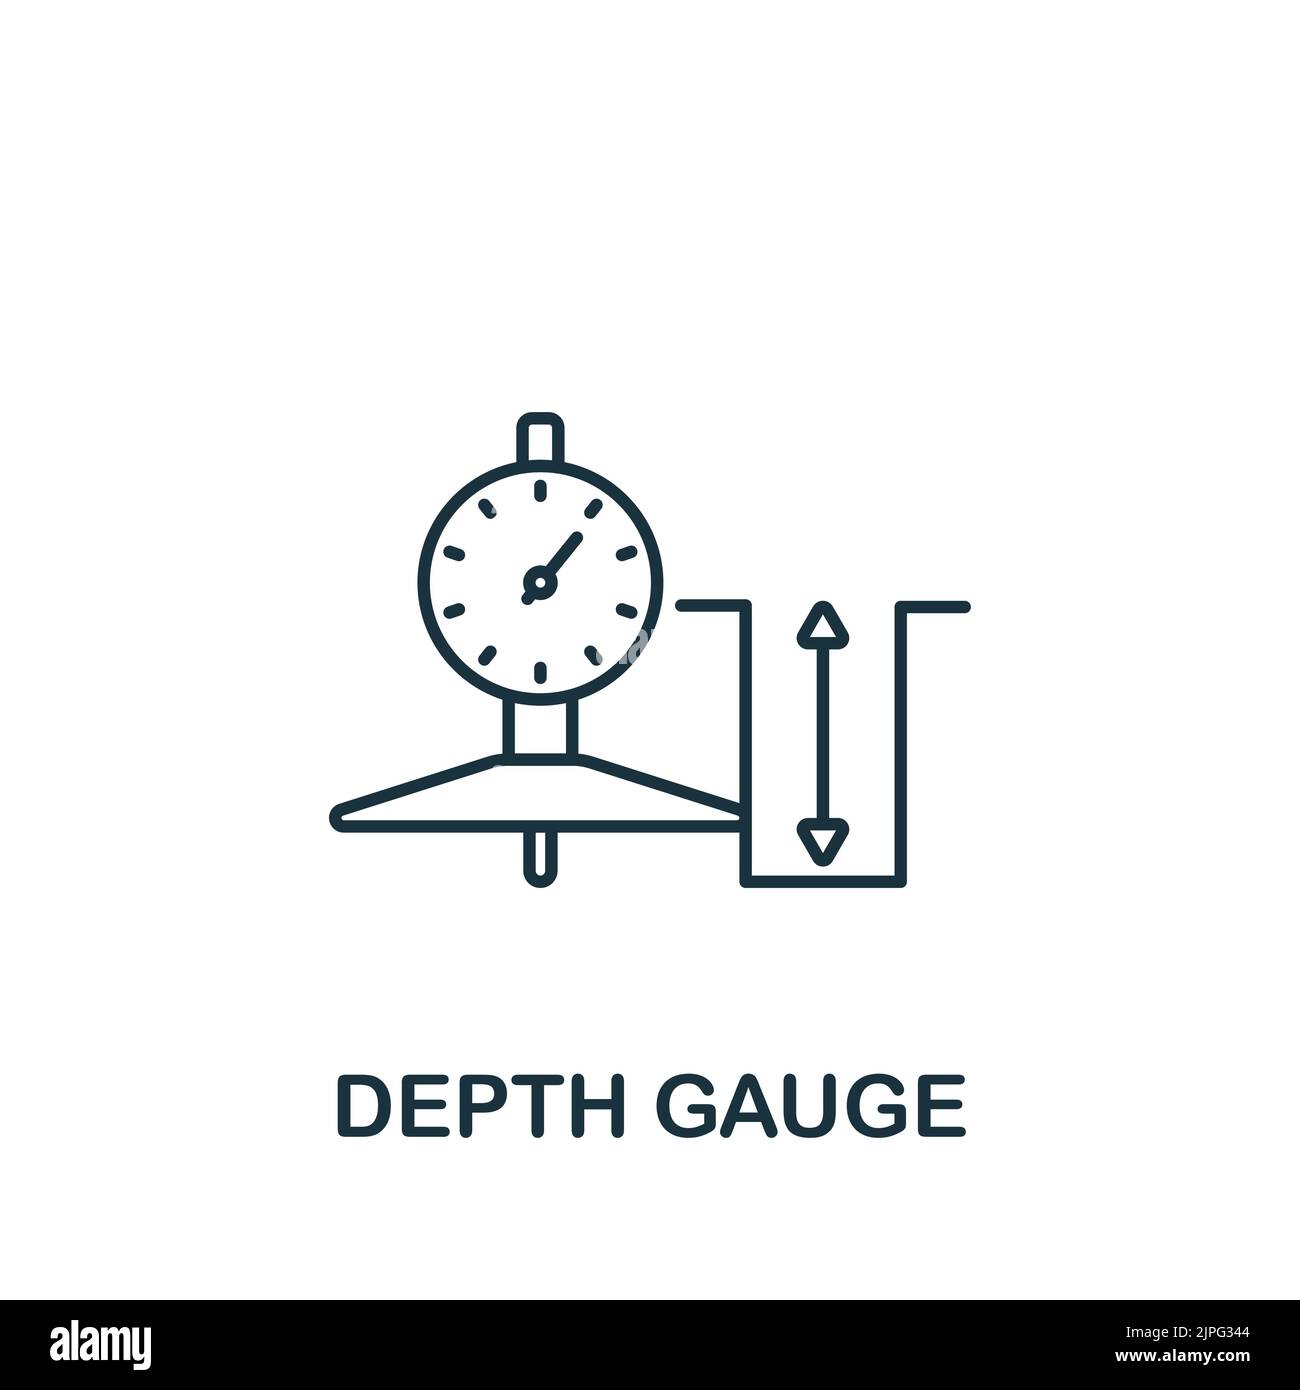 Depth Gauge icon. Line simple Measuring icon for templates, web design and infographics Stock Vector